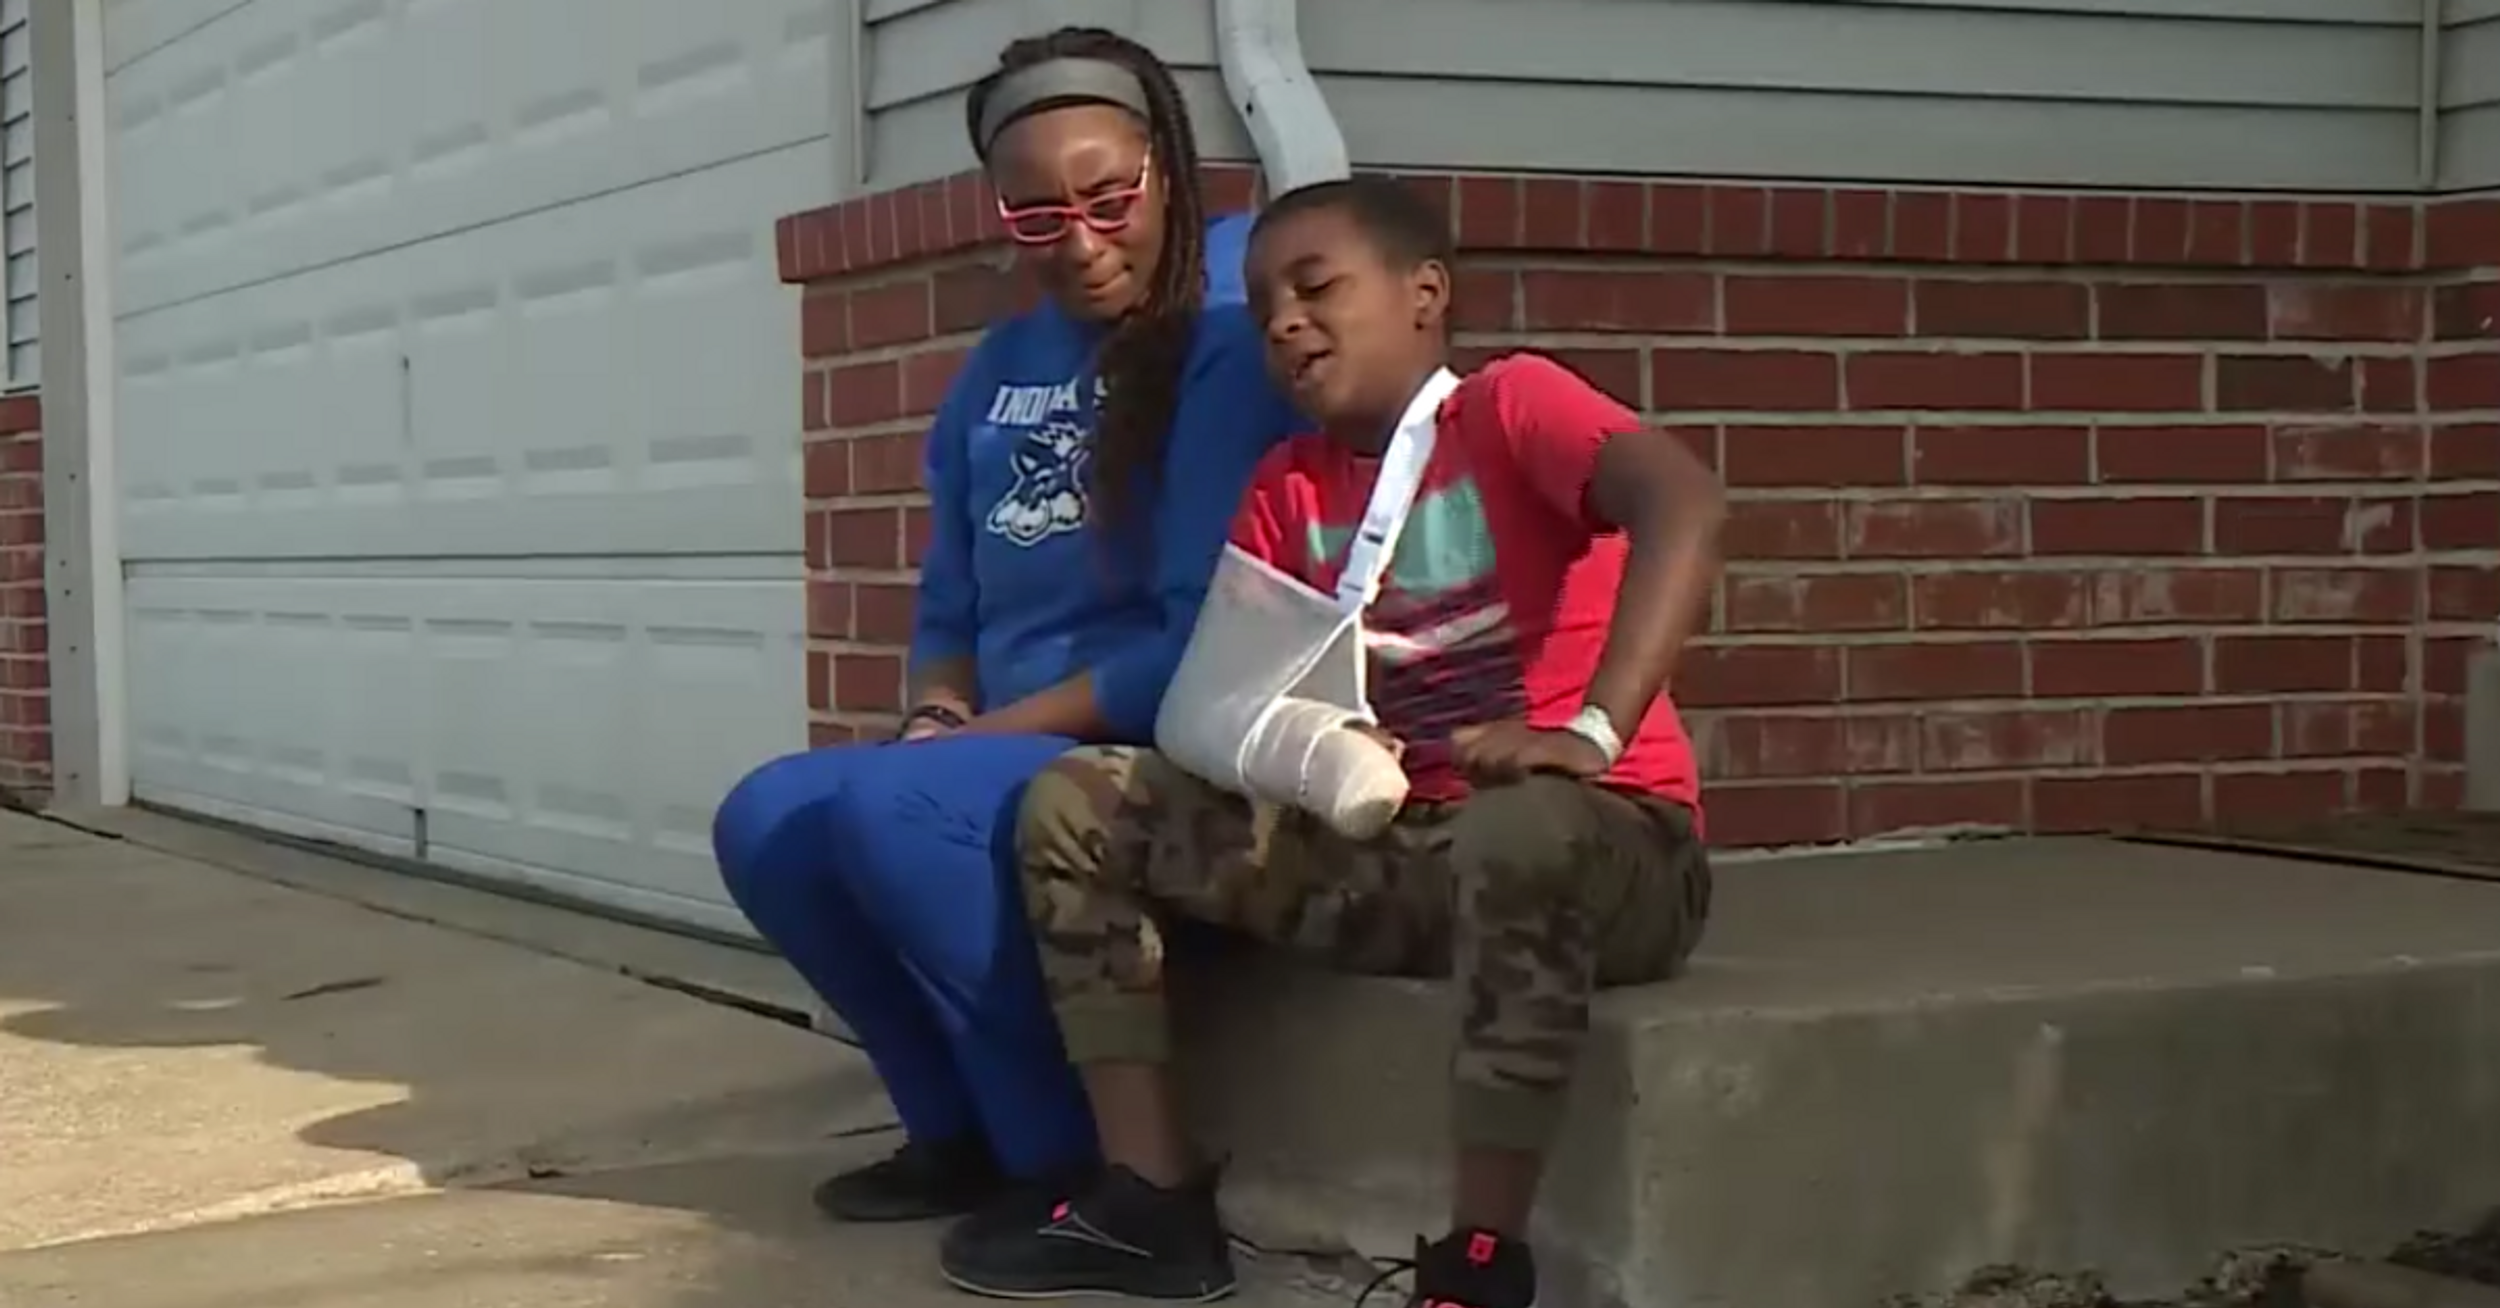 Missouri Family Blasts School For Not Calling 911 After 9-Year-Old Boy Lost Finger Due To Fall